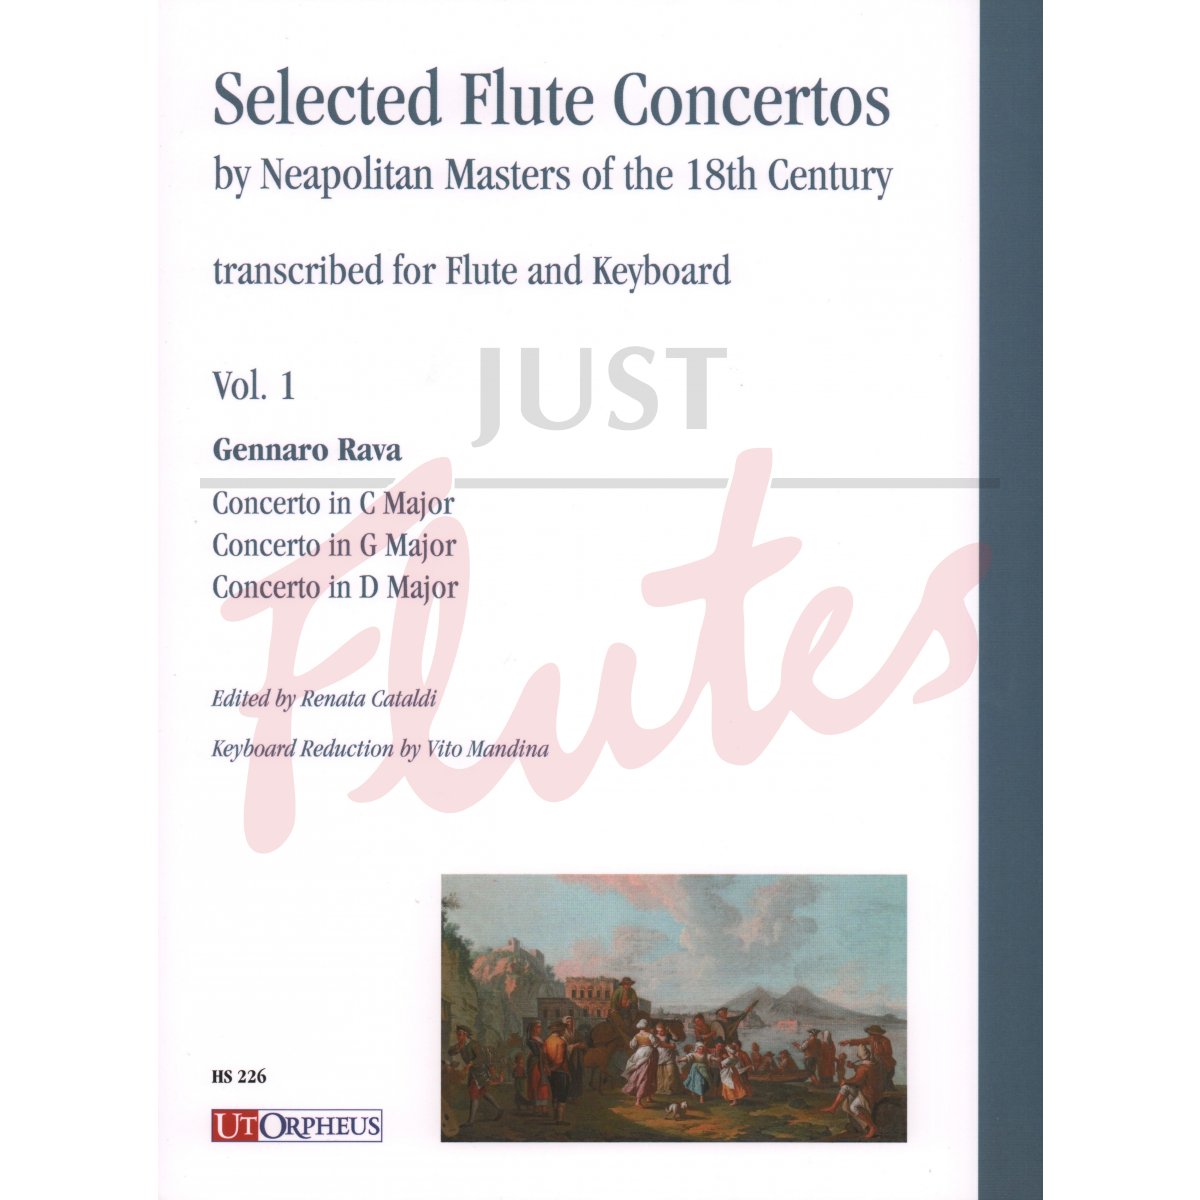 Selected Flute Concertos by Neapolitan Masters of the 18th Century for Flute and Piano, Vol. 1: Gennaro Rava